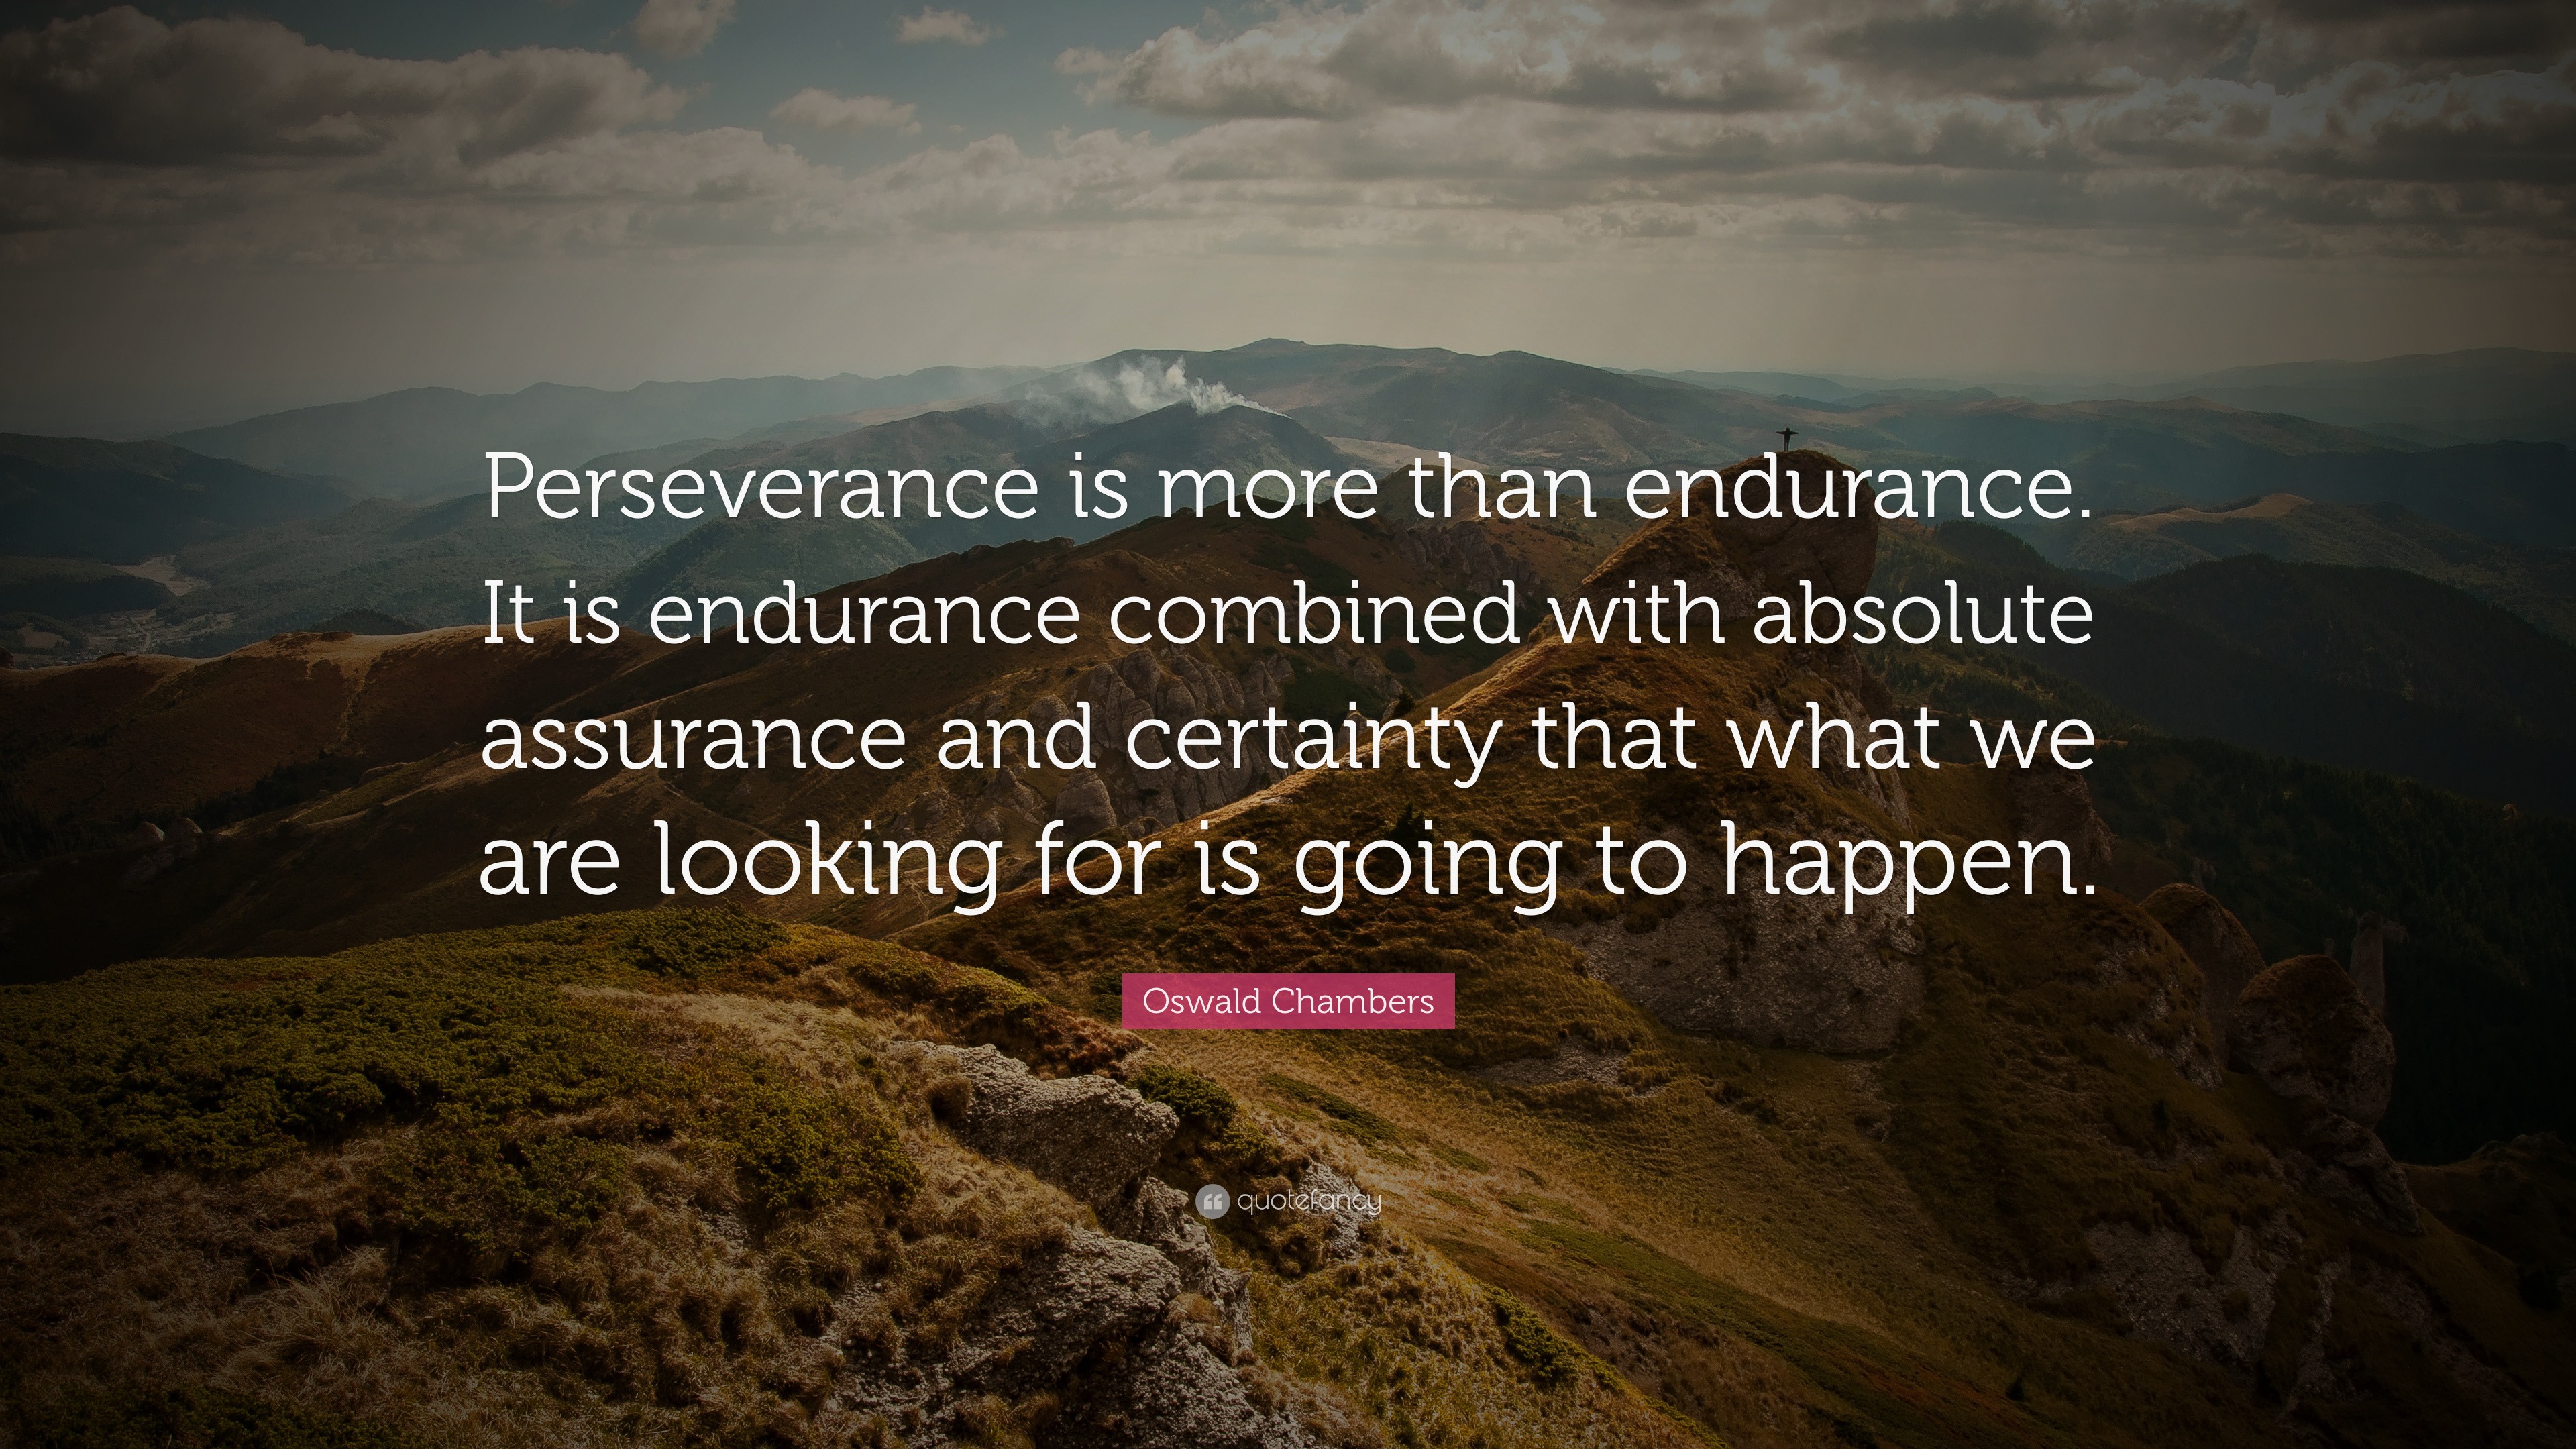 It is endurance combined with absolute assurance and certainty that what we...